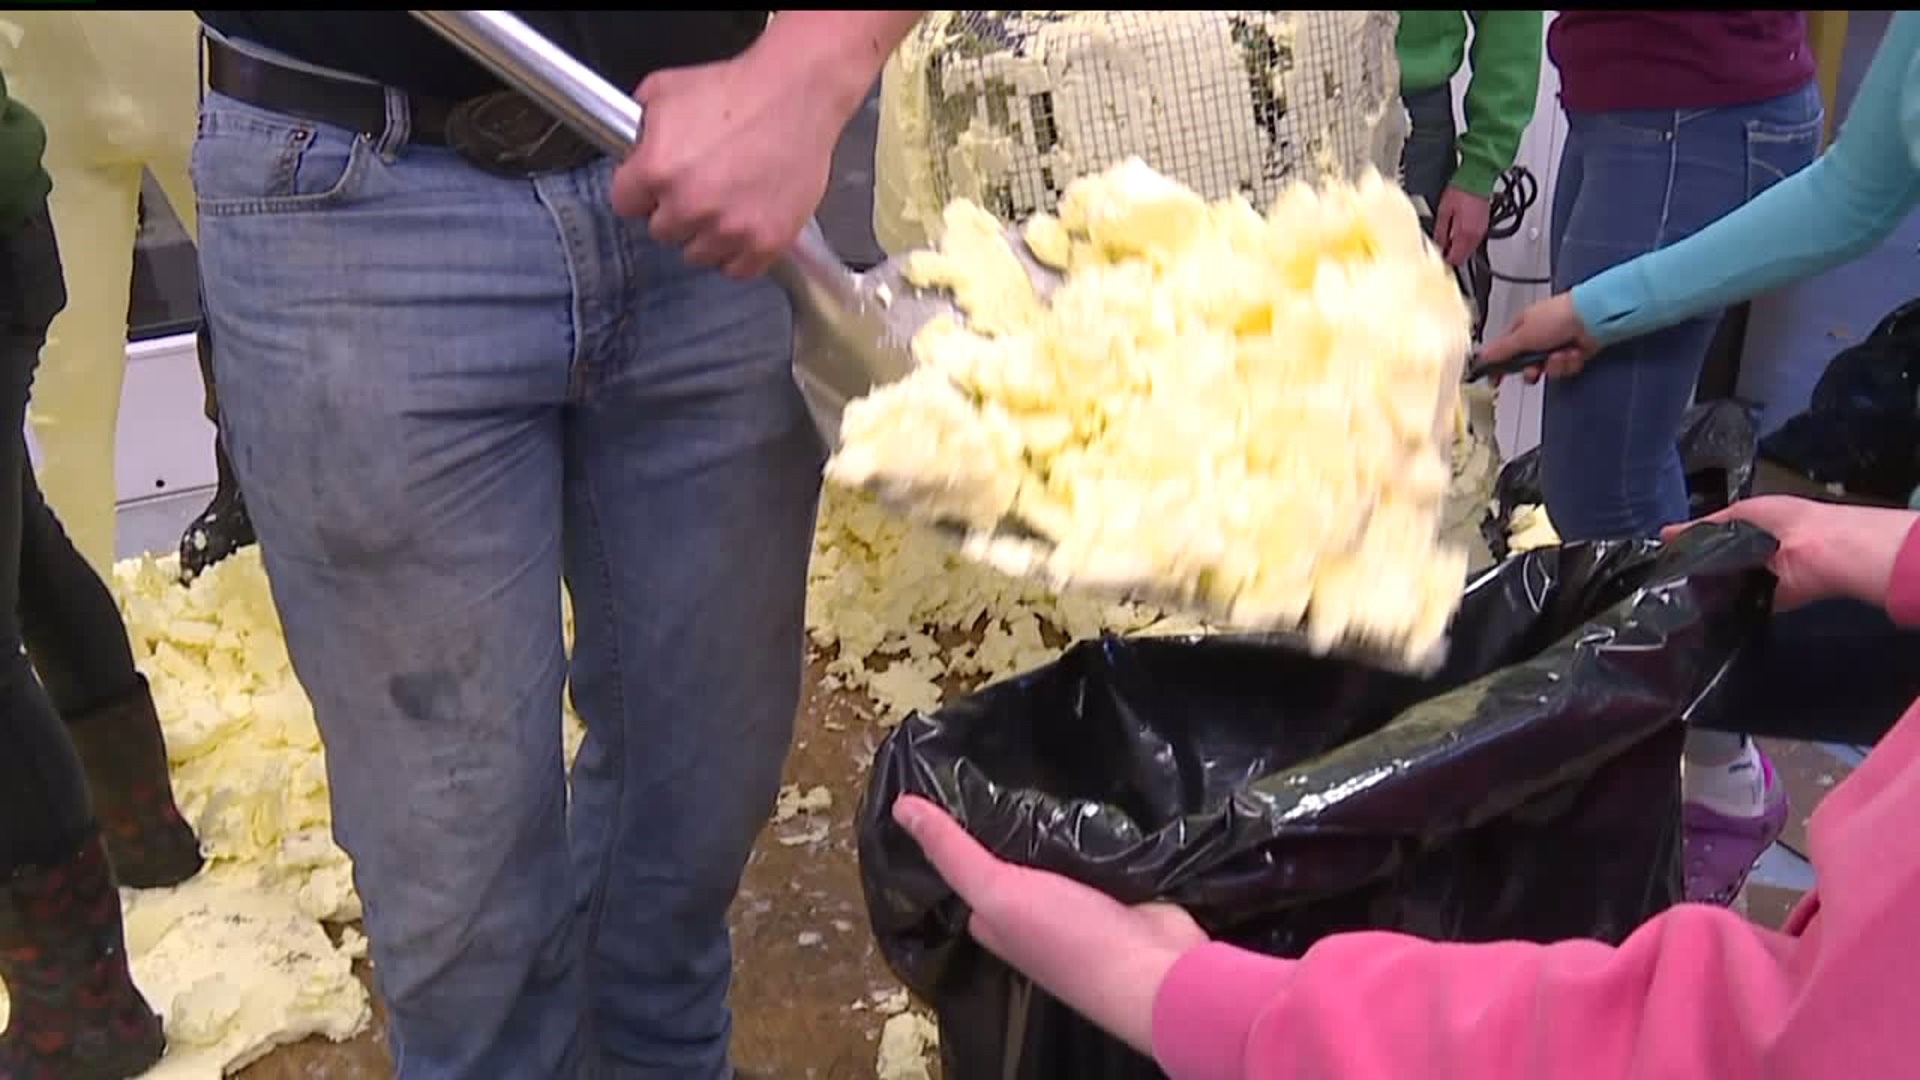 2020 Pennsylvania Farm Show butter sculpture taken down to be recycled